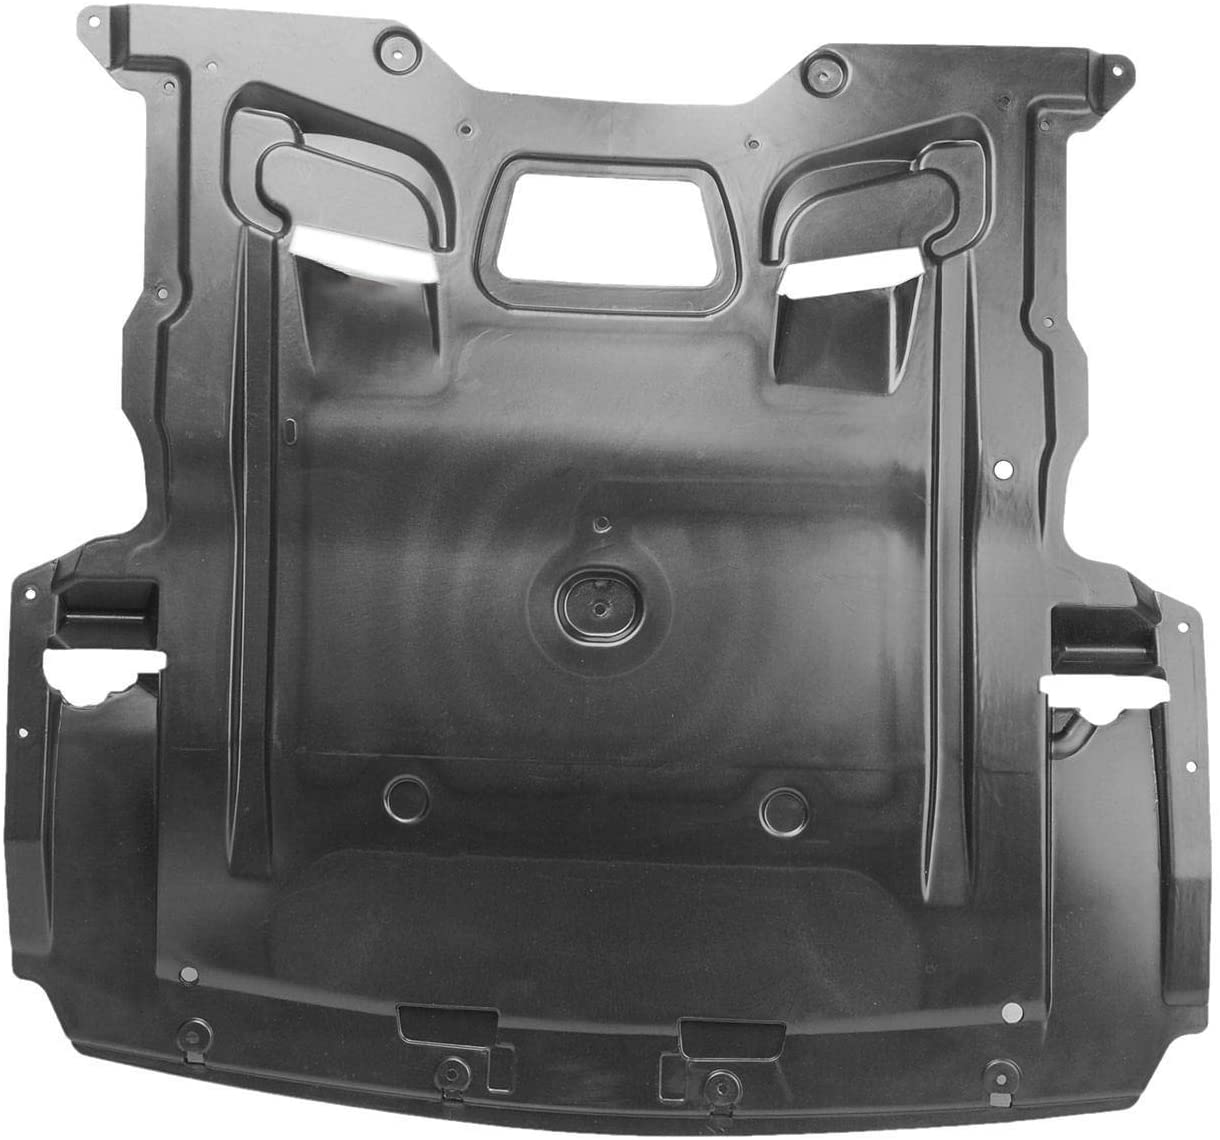 Aftermarket UNDER ENGINE COVERS for BMW - 550I GT, 550i GT,10-15,Lower engine cover